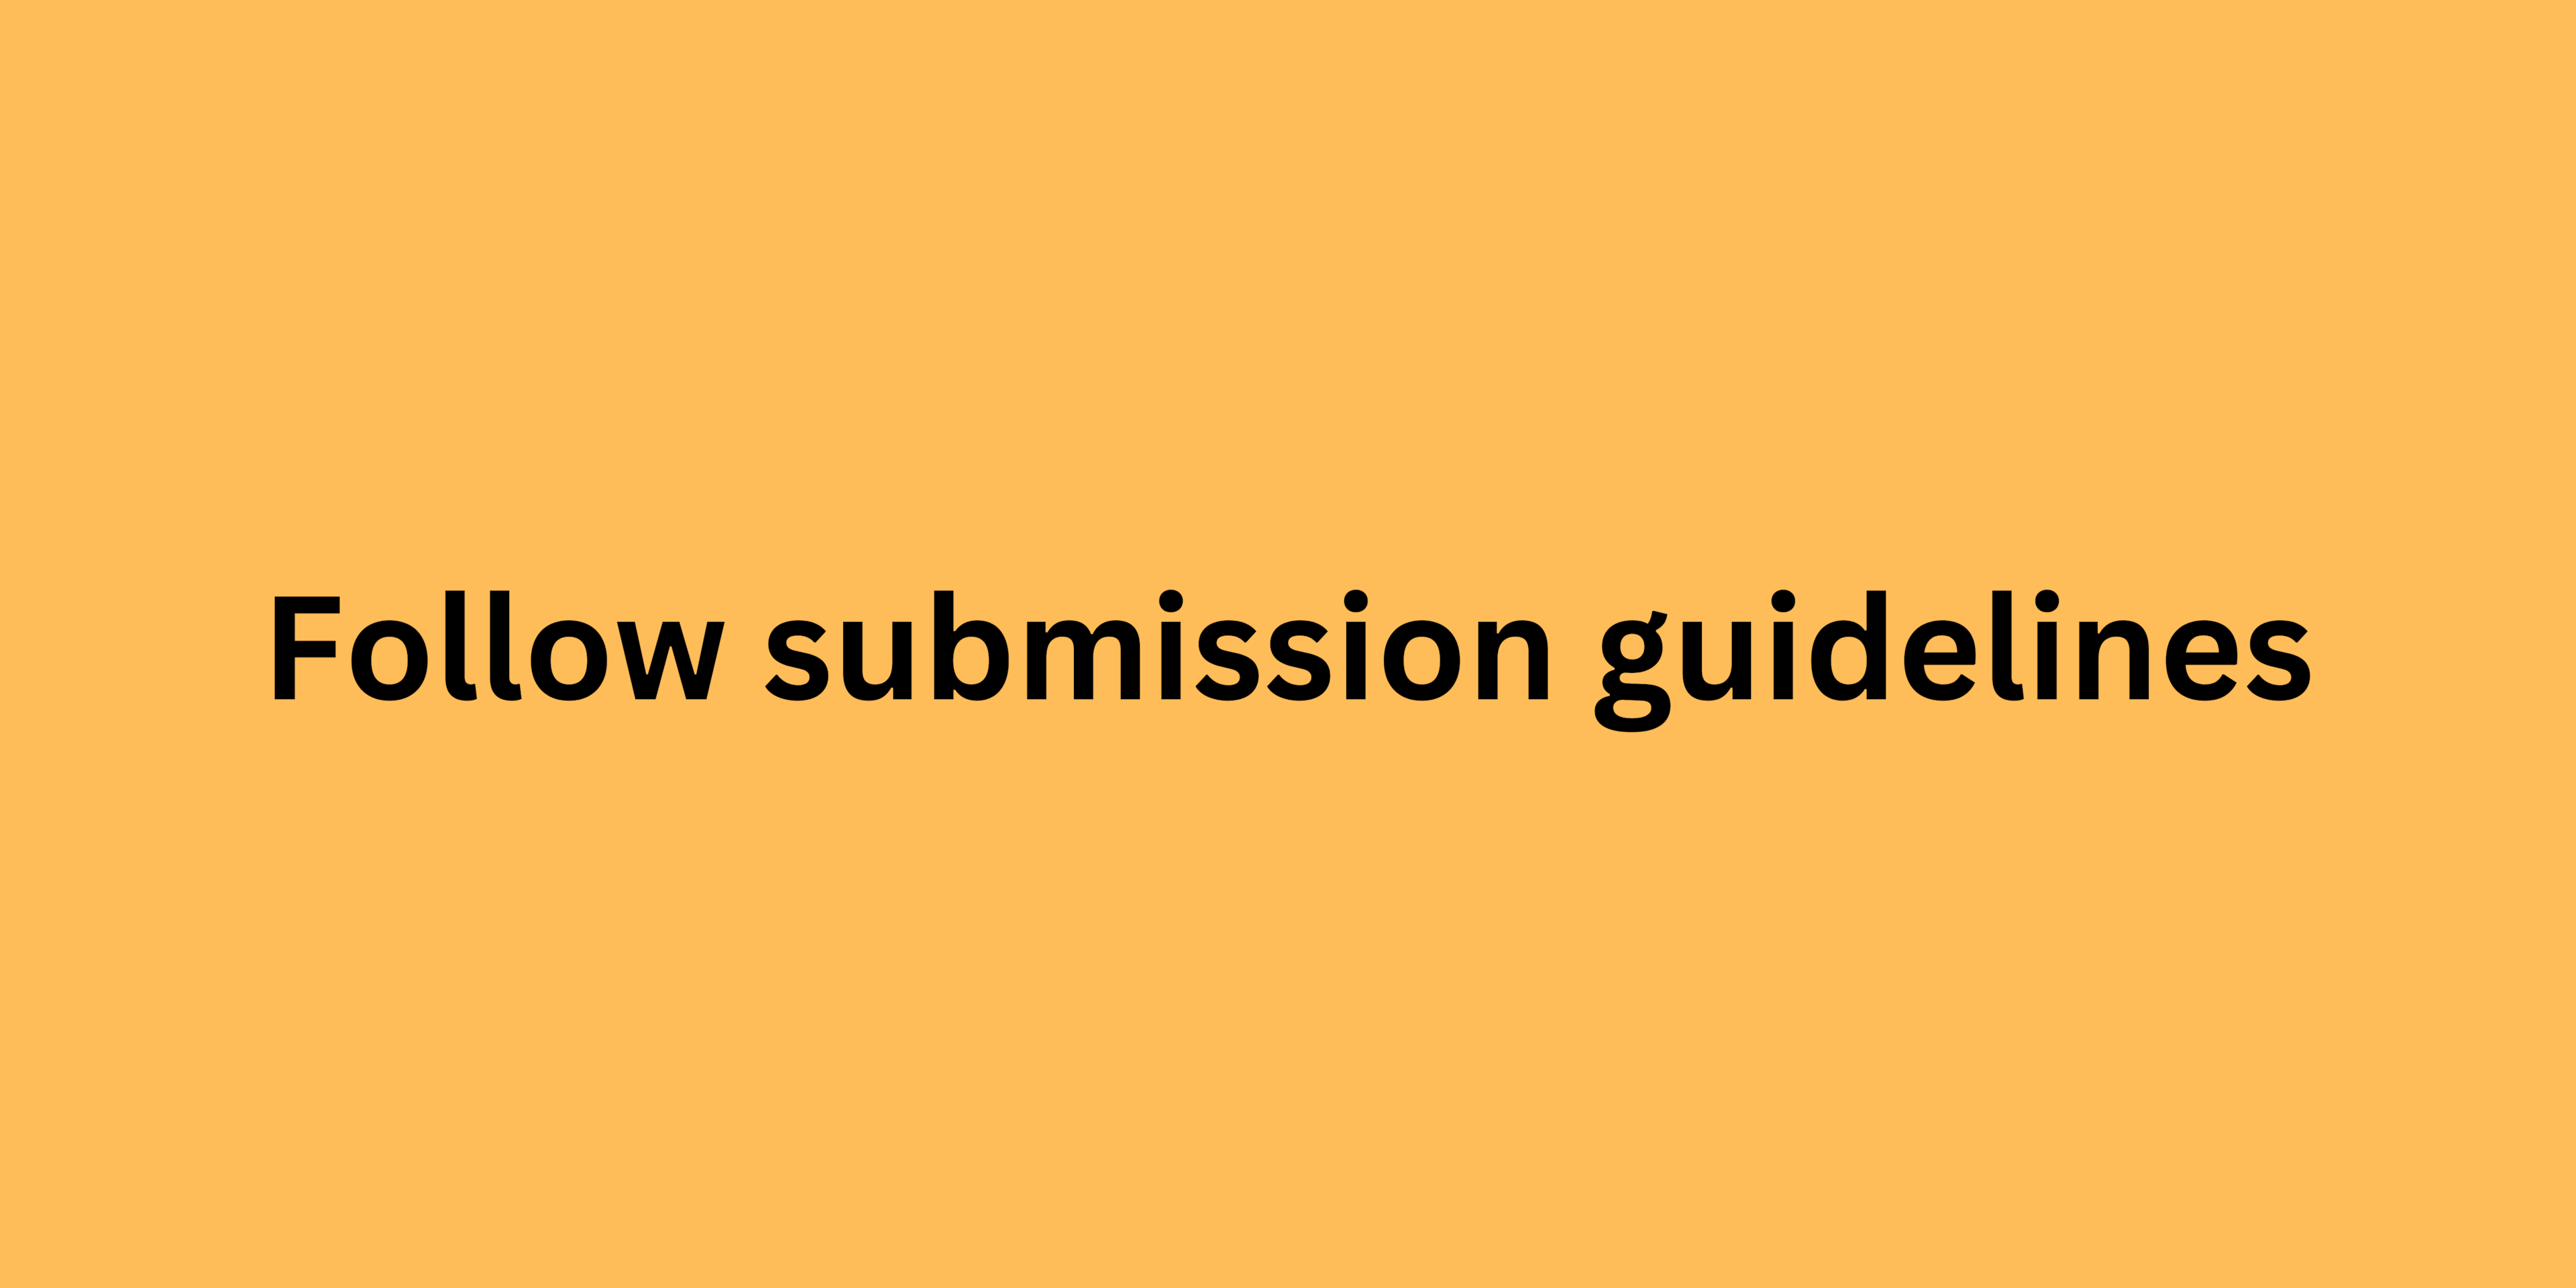 Follow submission guidelines